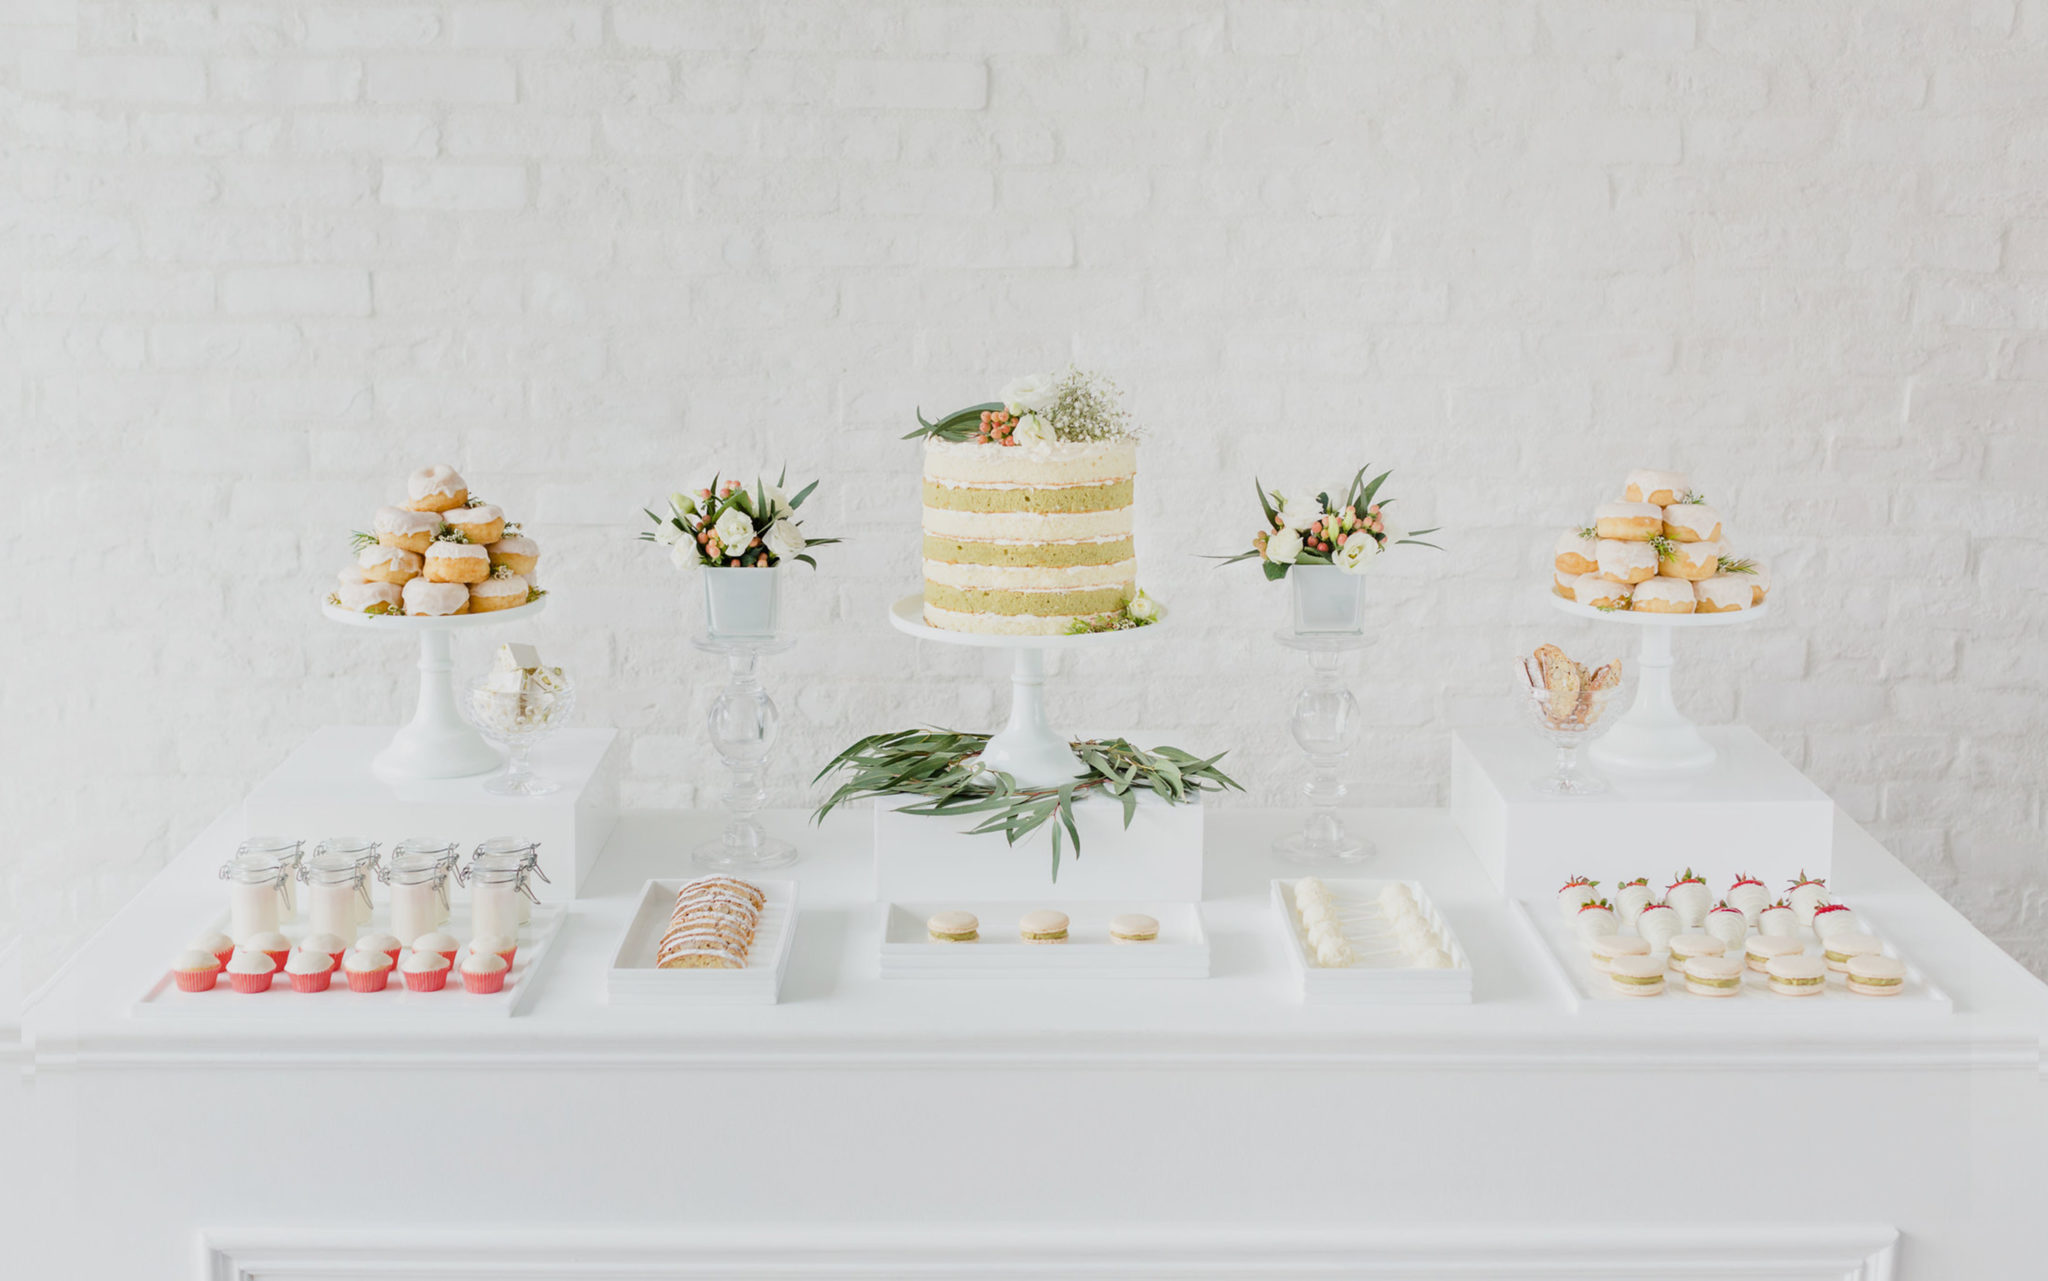 Dessert table from a wedding catered by Ristorante Beatrice.